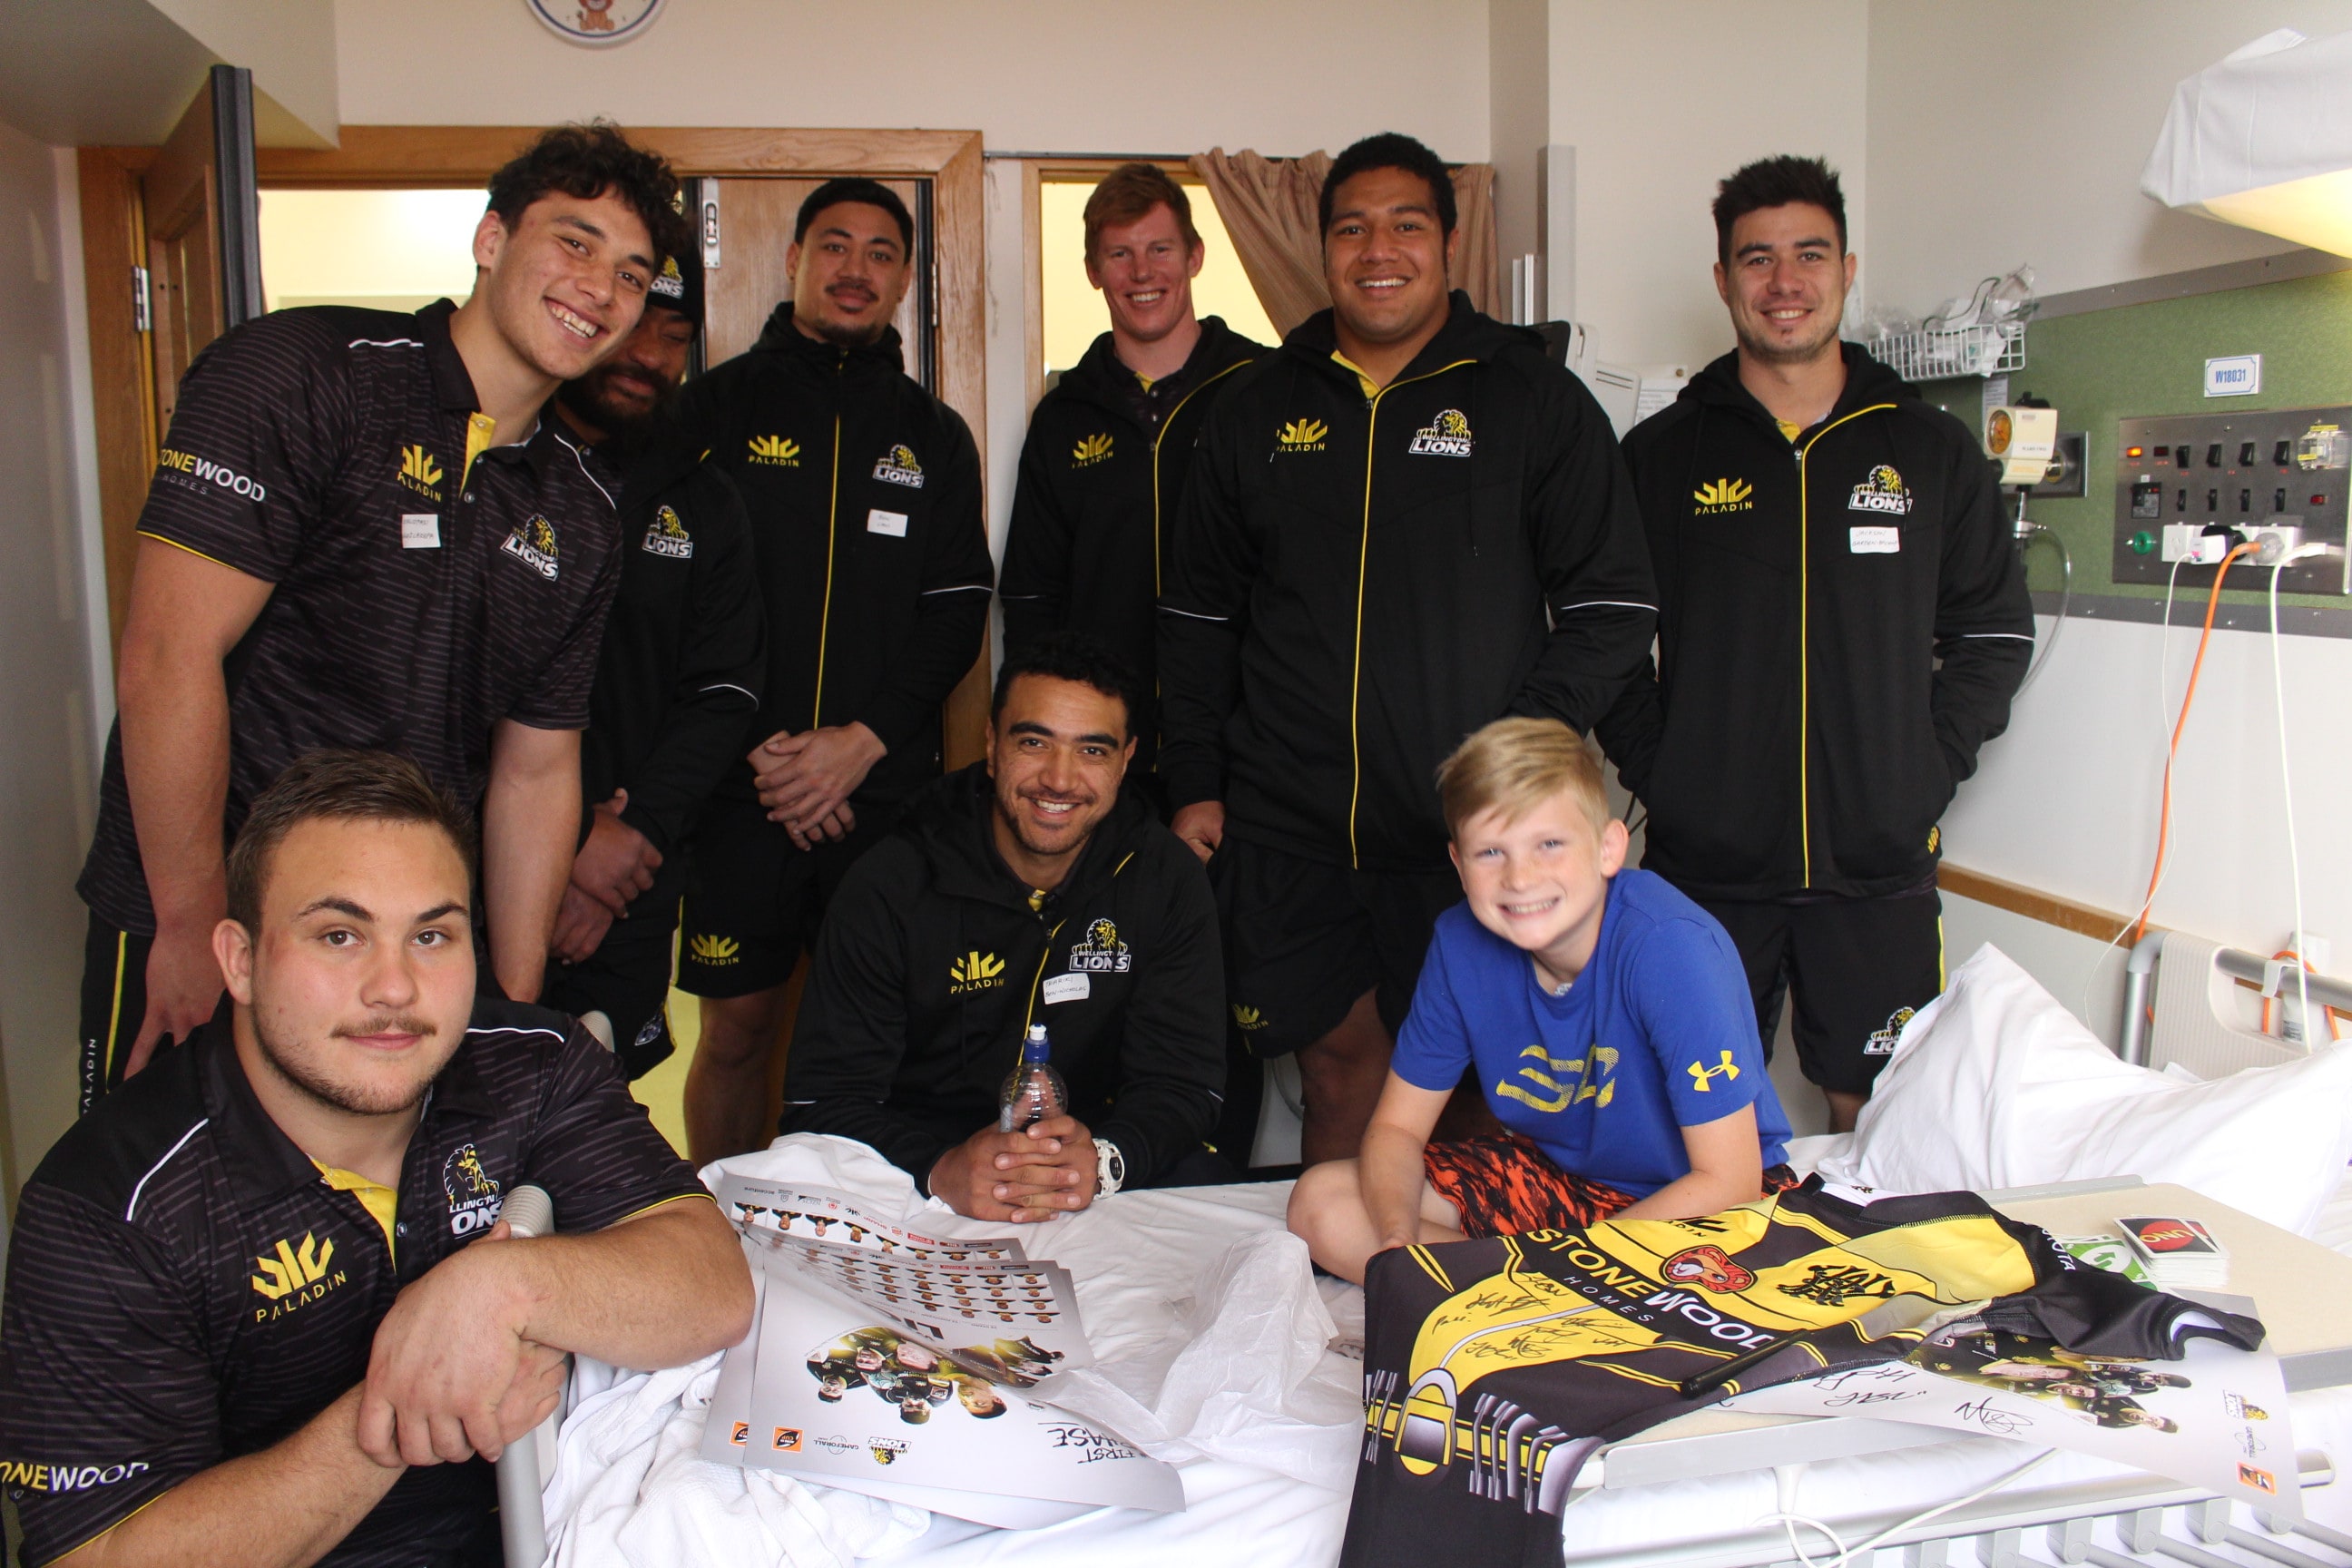 Wellington Children's Hospital patient with some of the Wellington Lions rugby team.